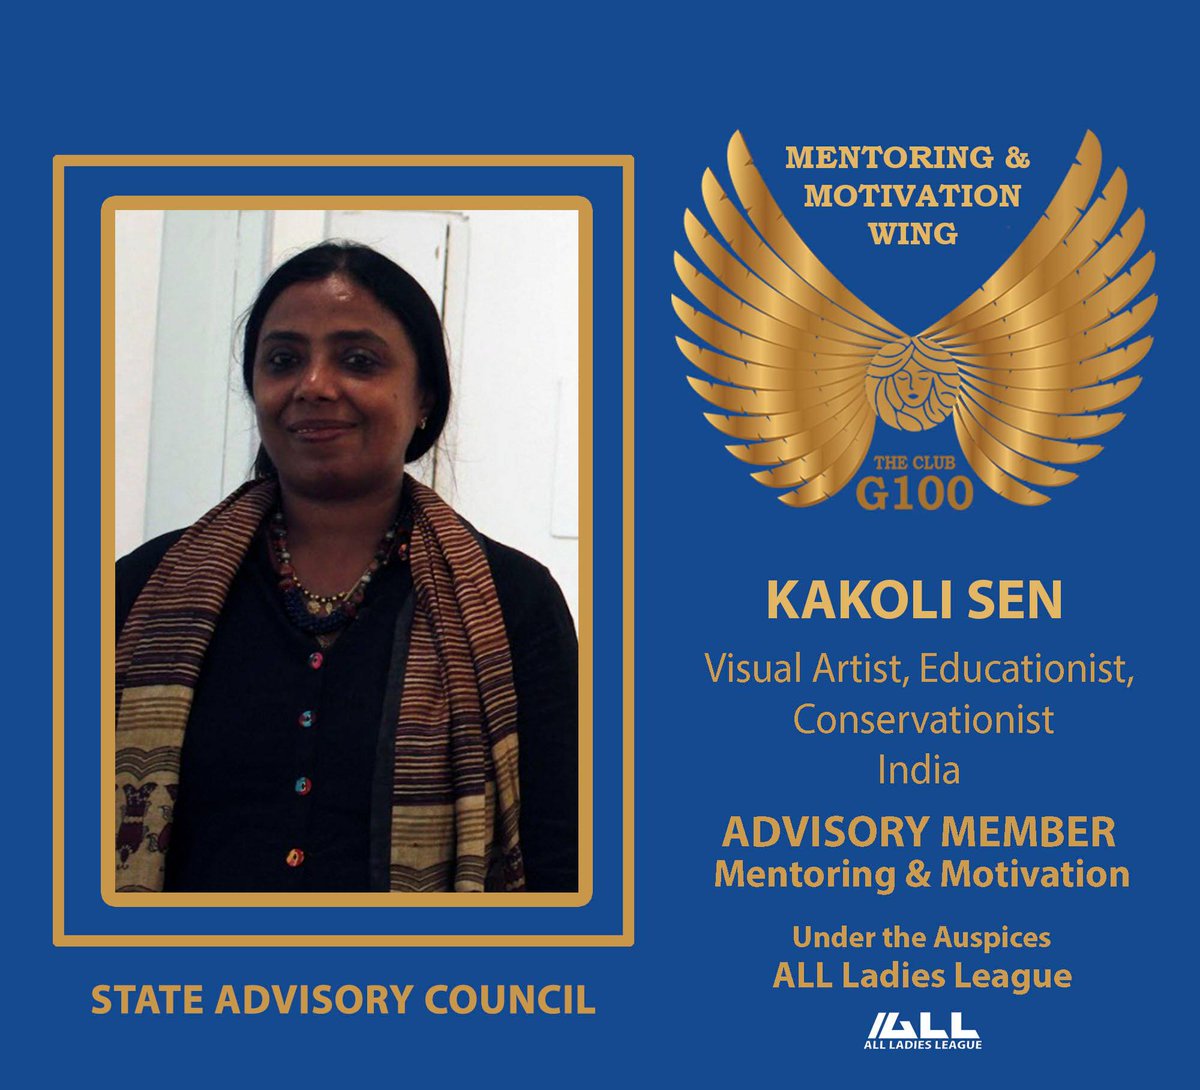 Let’s welcome Kakoli Sen as the #AdvisoryCouncil for #Gujrat #India #G100
She is a Visual Artist, writer & teacher with 30 years of experience in #art. She is a graduate from Delhi University. She also did Art Appreciation Course & Culture Course from National Museum, New Delhi.